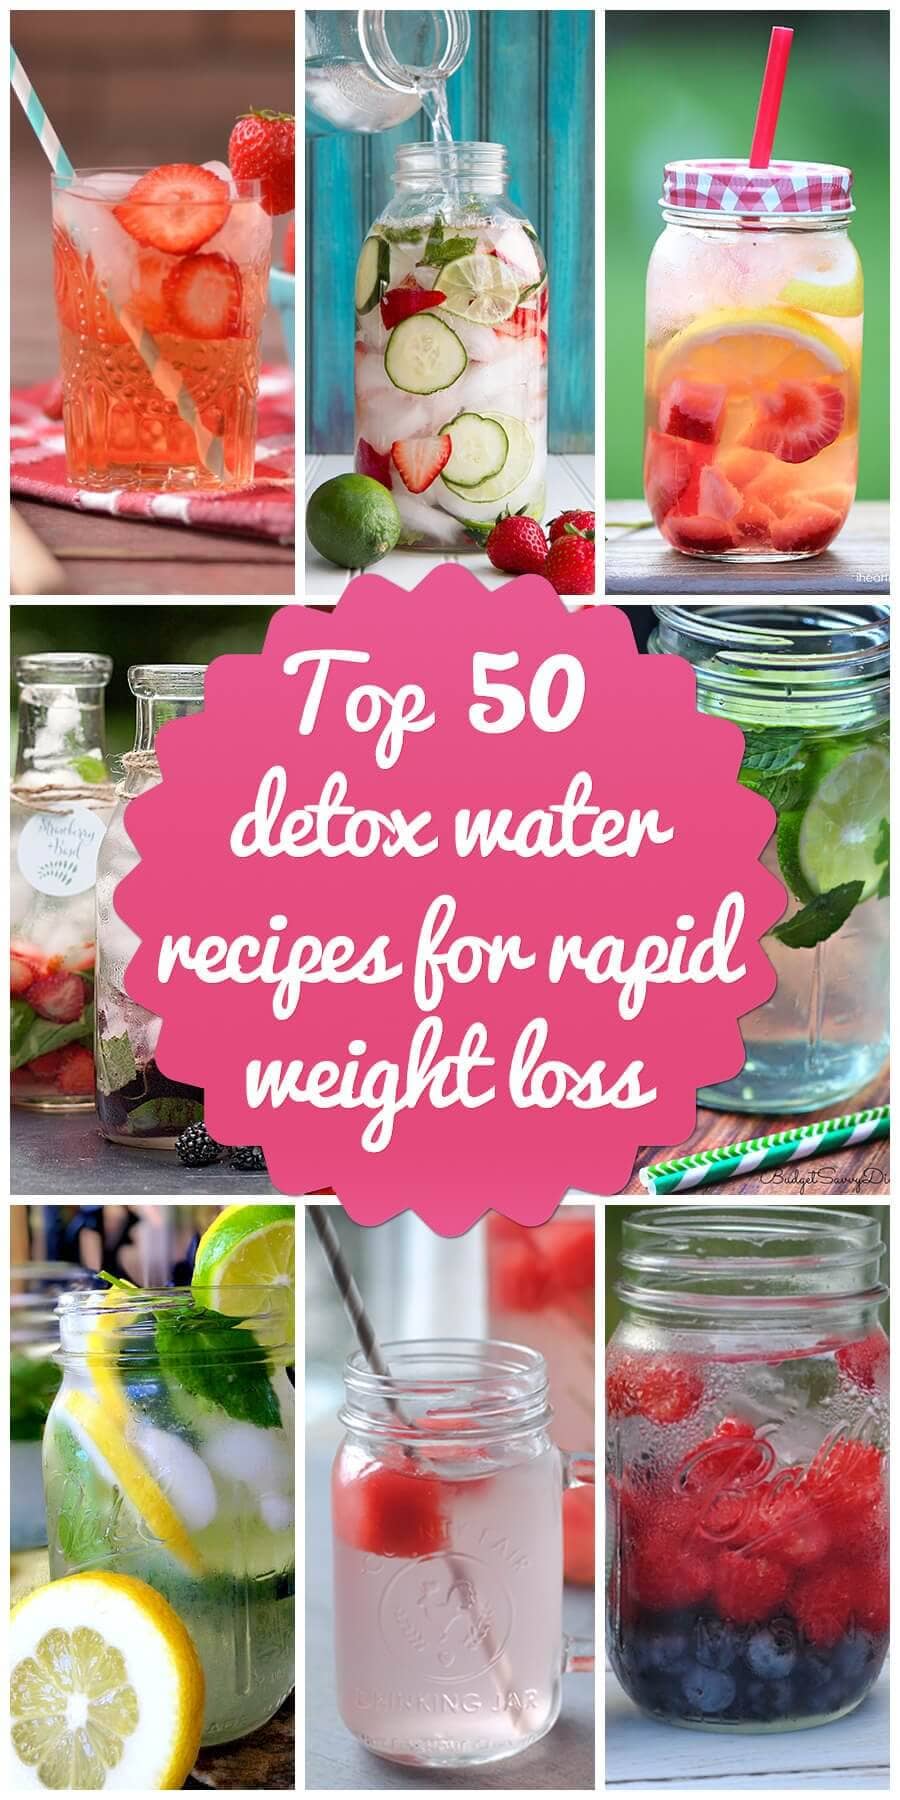 Top 50 detox drinks for rapid weight loss